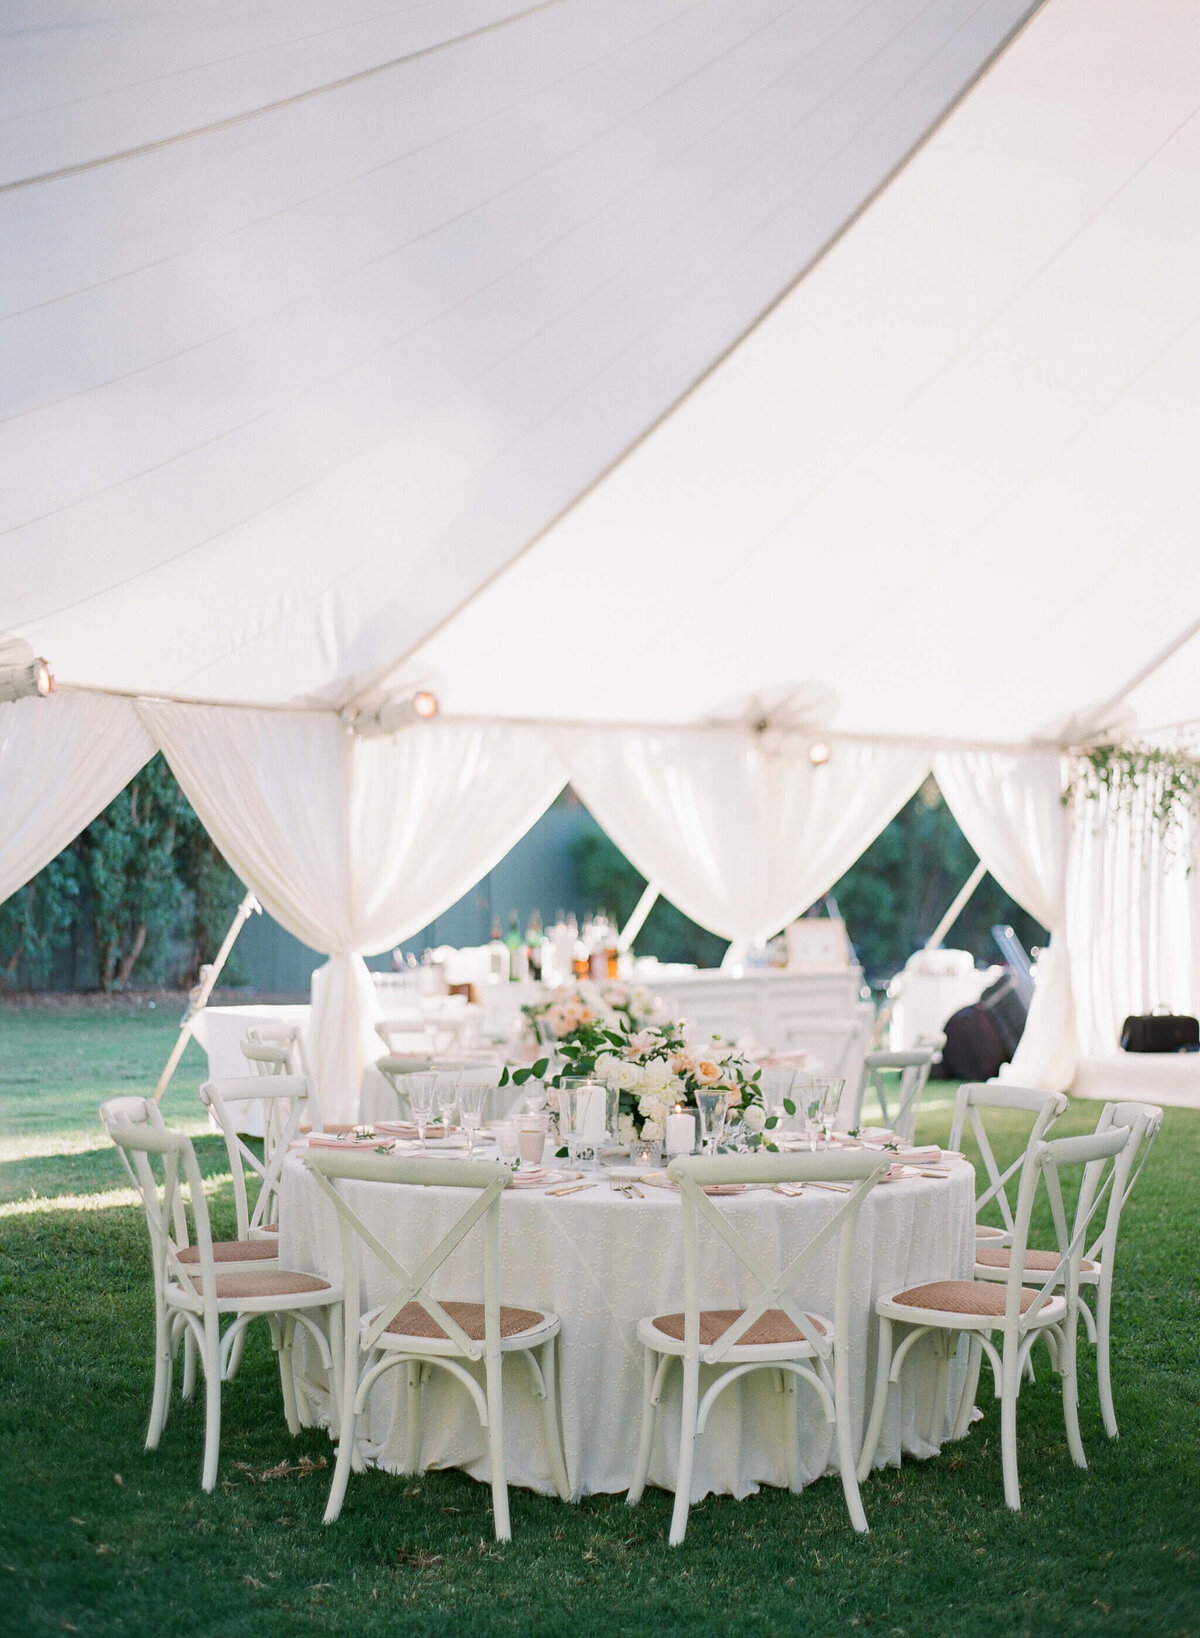 Wedding tables under an event tent in Ojai, California